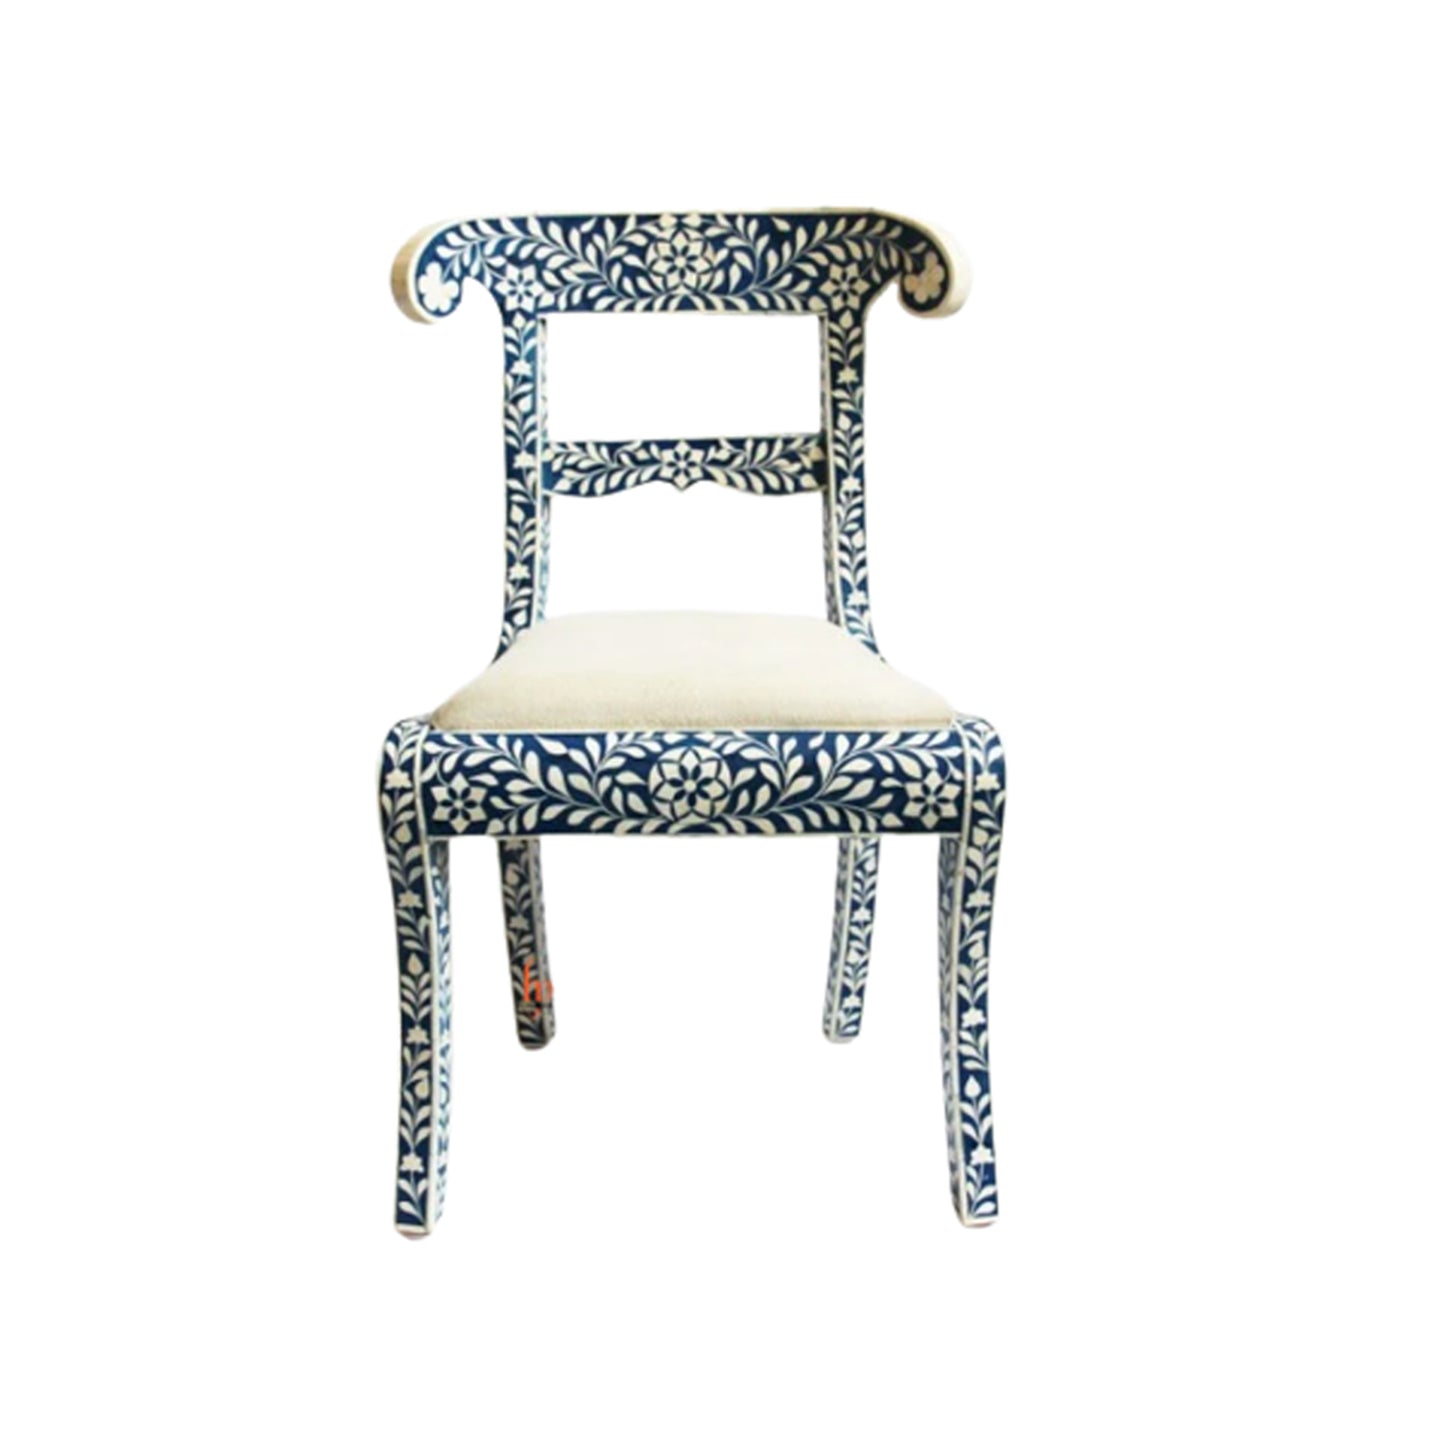 Handmade Bone Inlay Chair Beautifully Crafted Floral Dinning Chair Beautiful Home Decor Chair